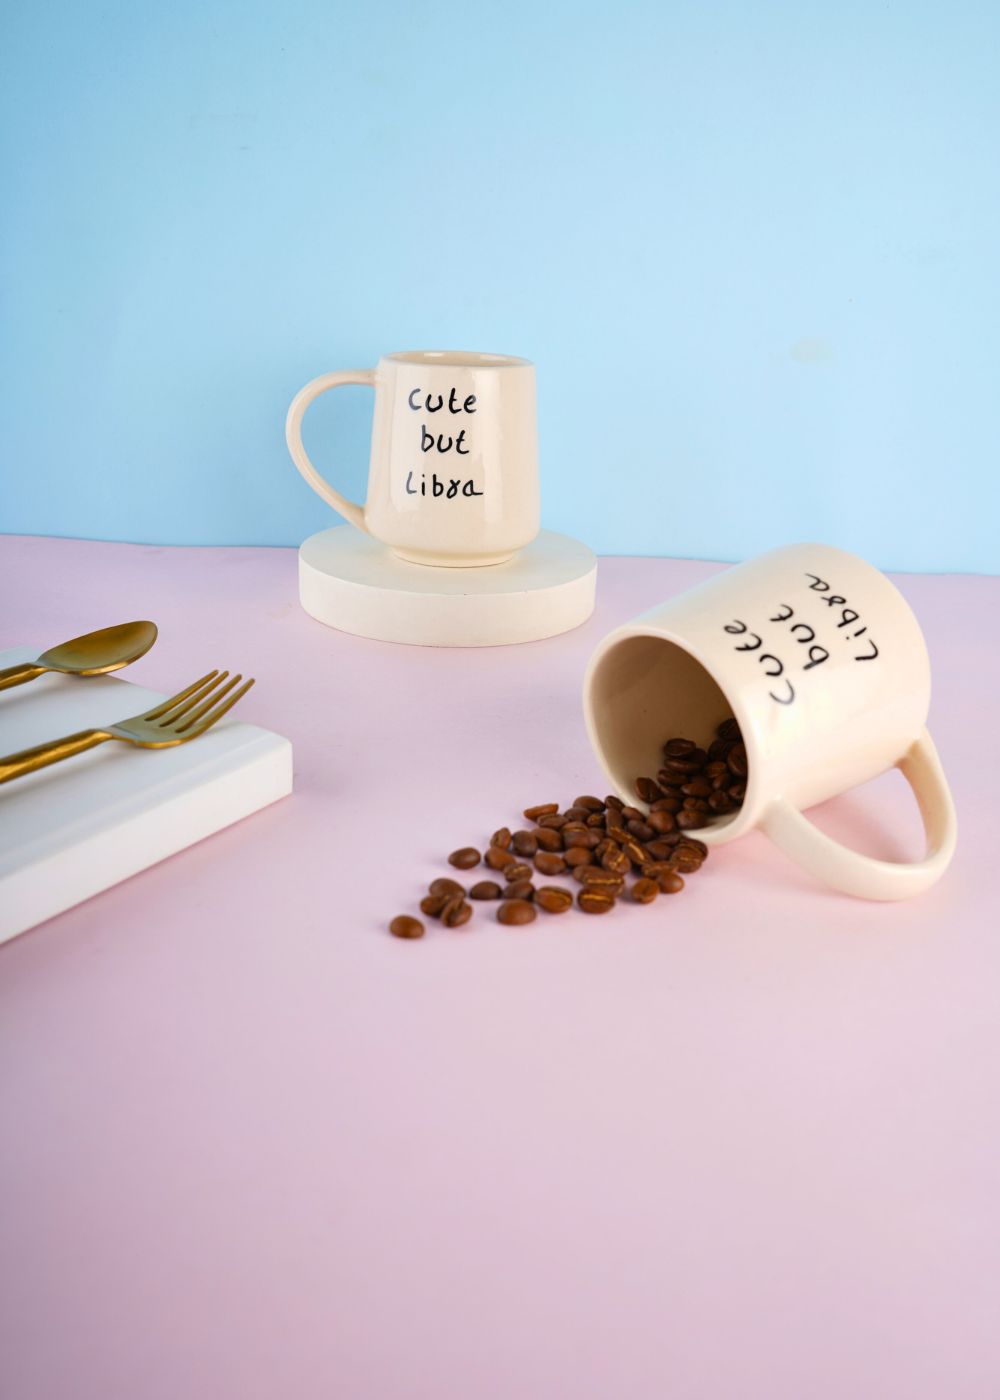 cute but libra mug with white color